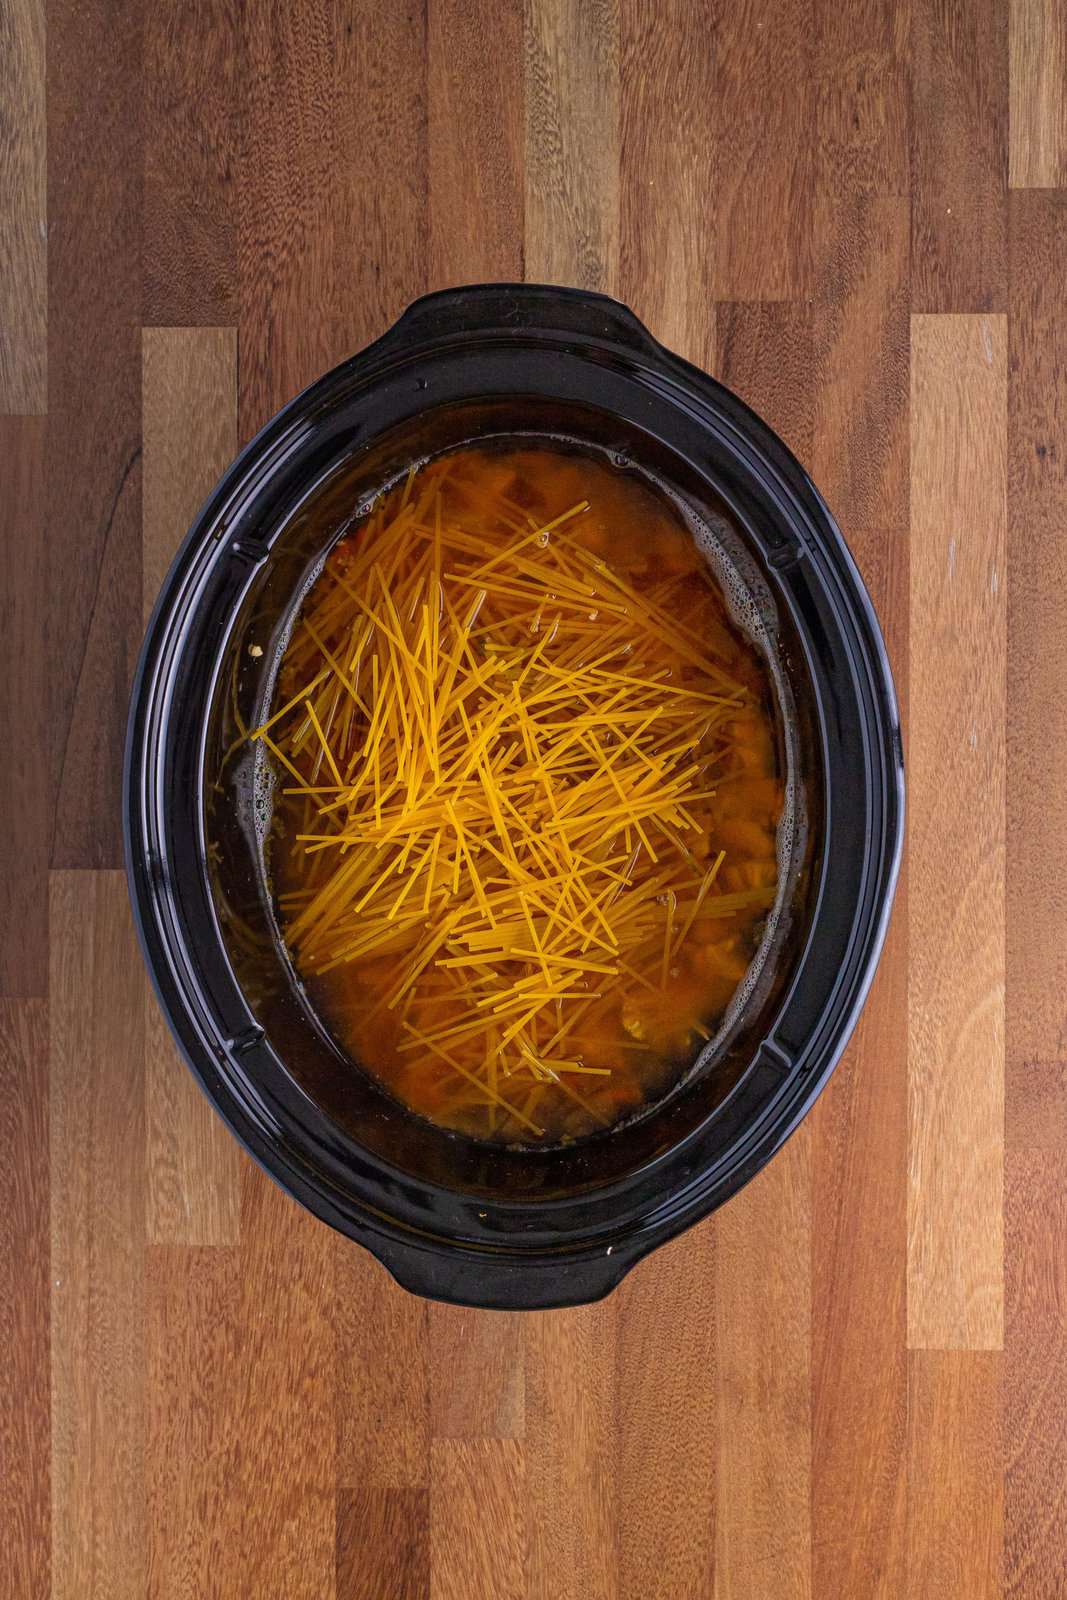 Broken up spaghetti pasta on top of soup in Crockpot.